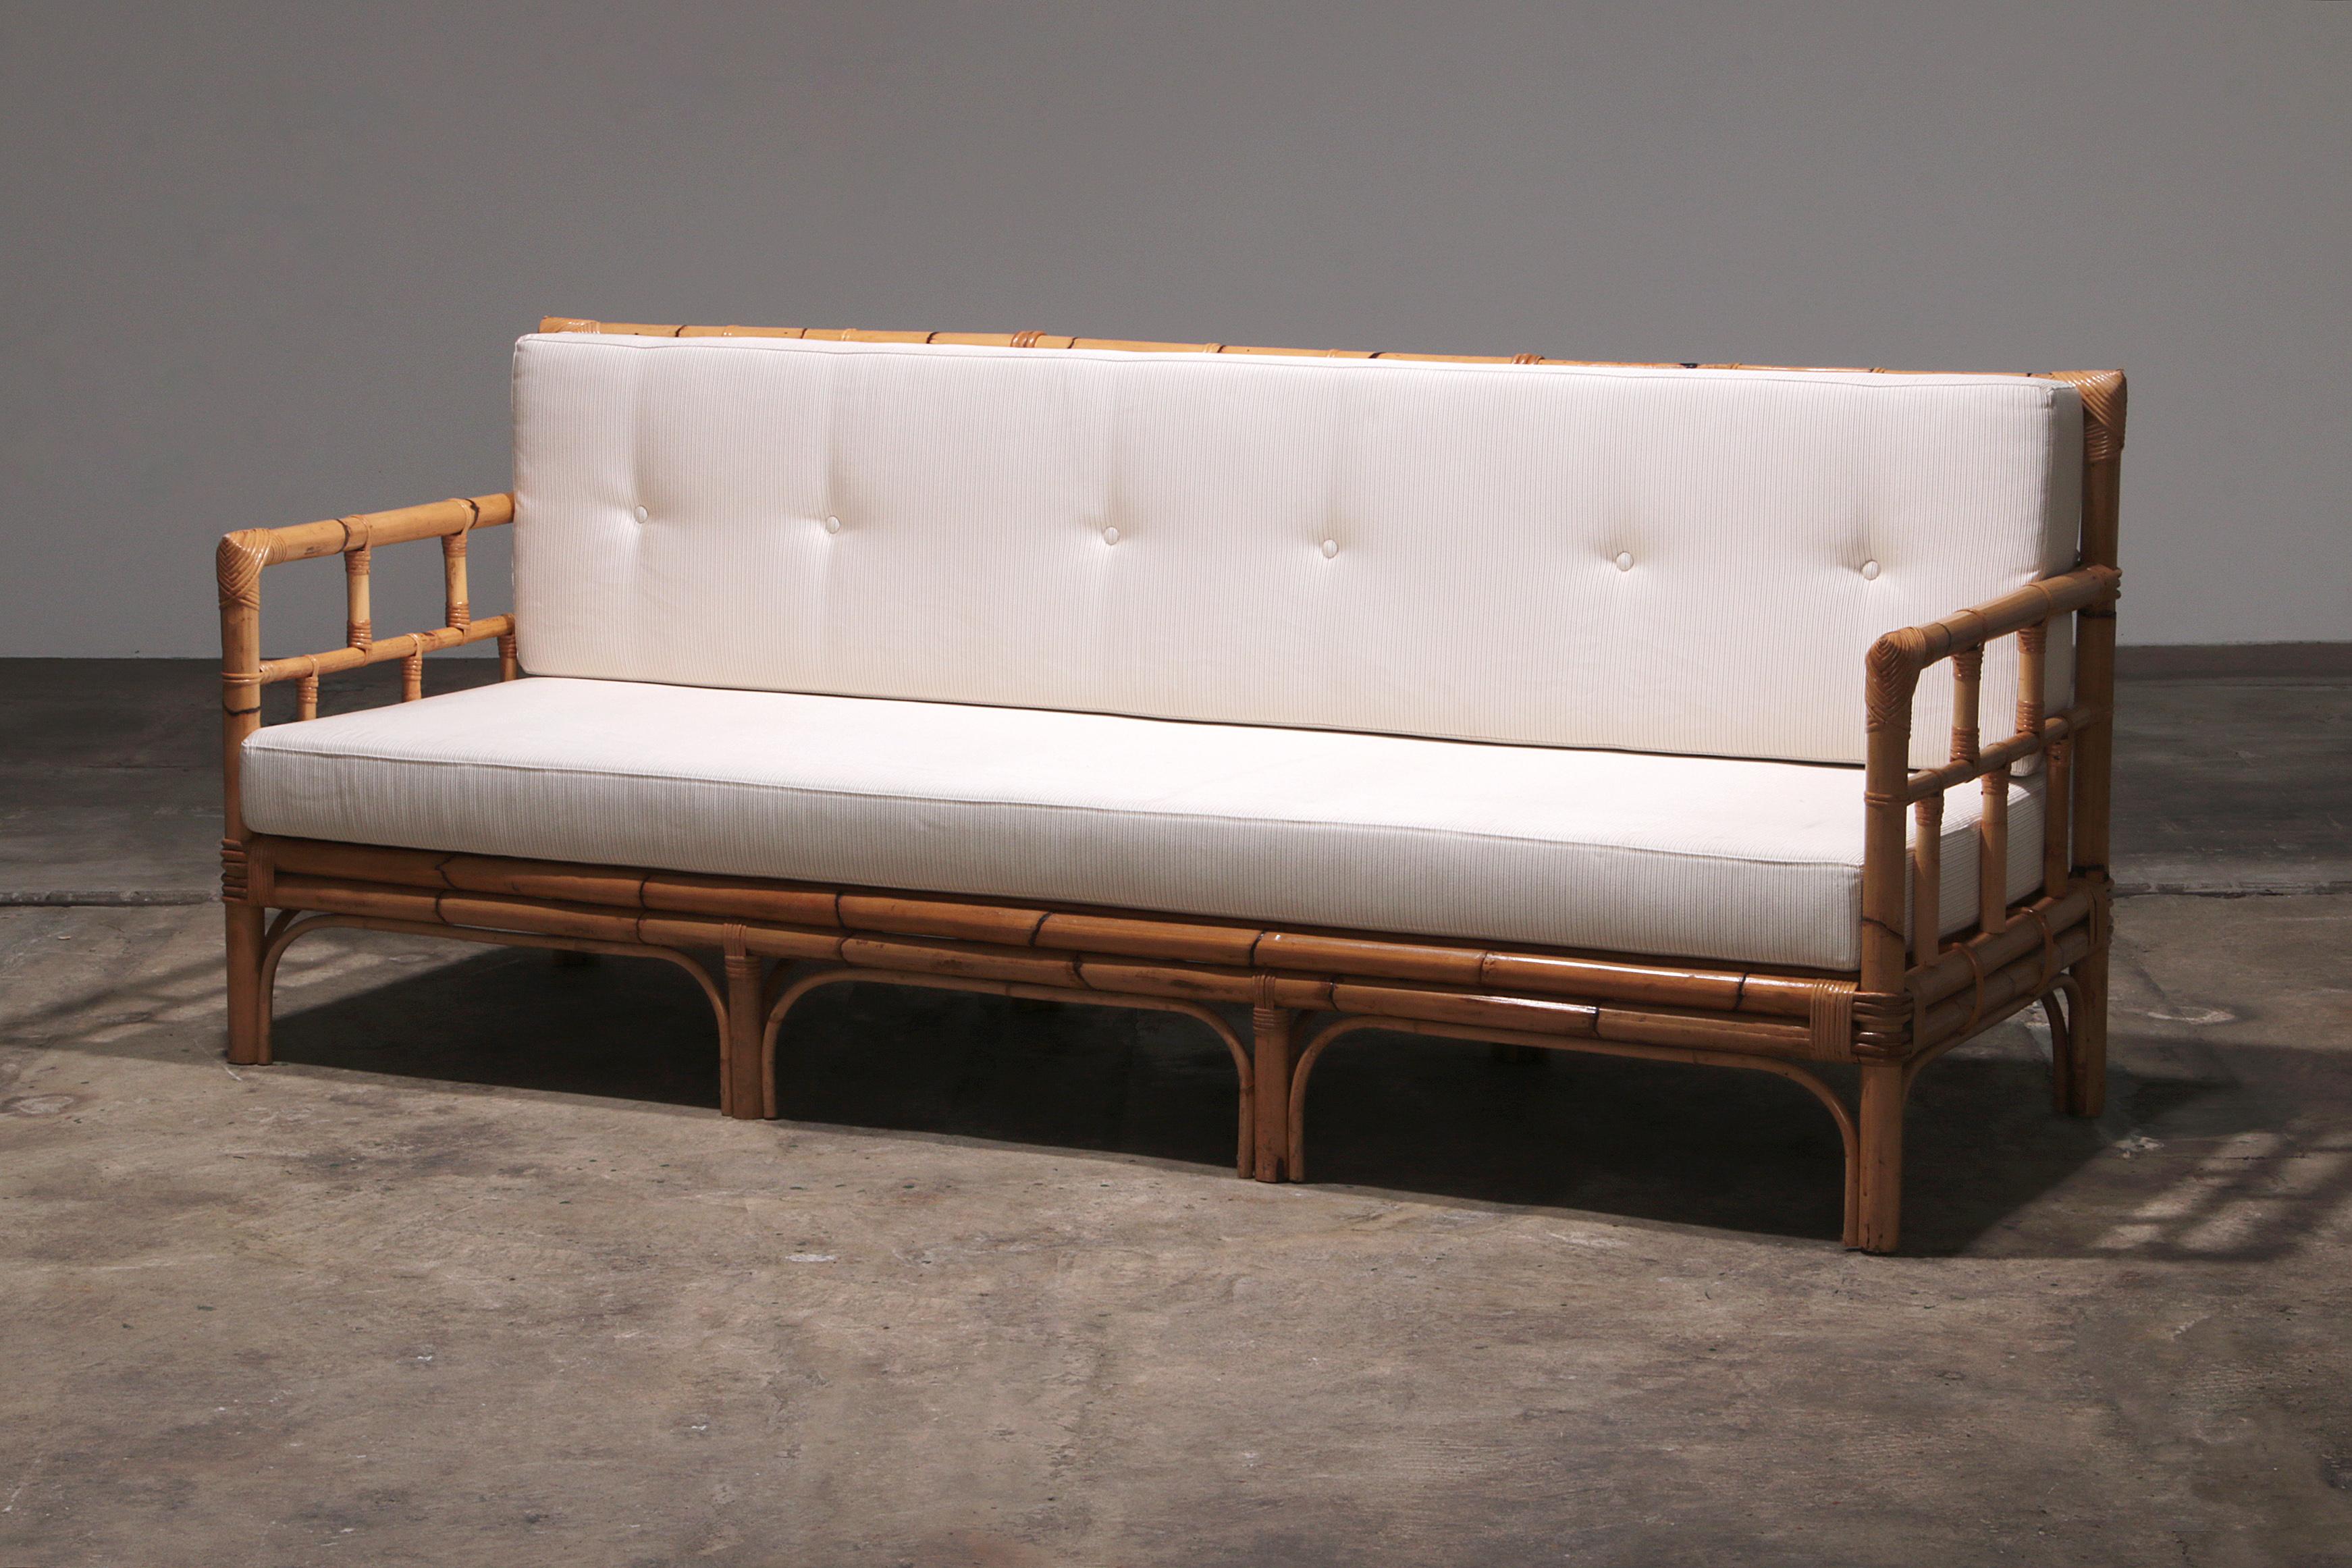 Bohemian Vintage Italian Bamboo Sofa with Cushions from the 1970s For Sale